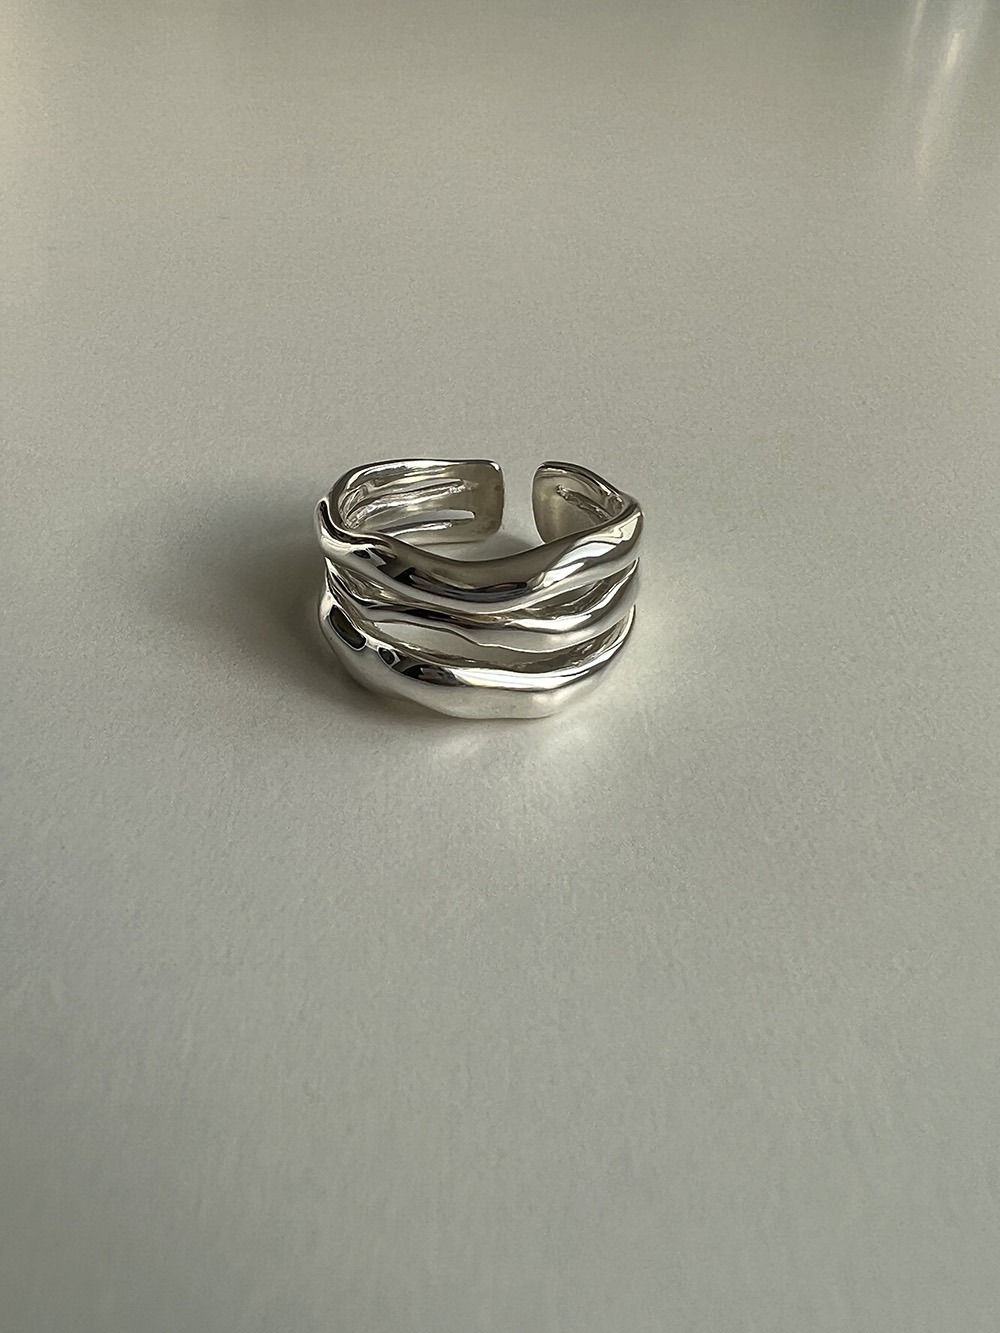 [92.5 silver] Craft ring